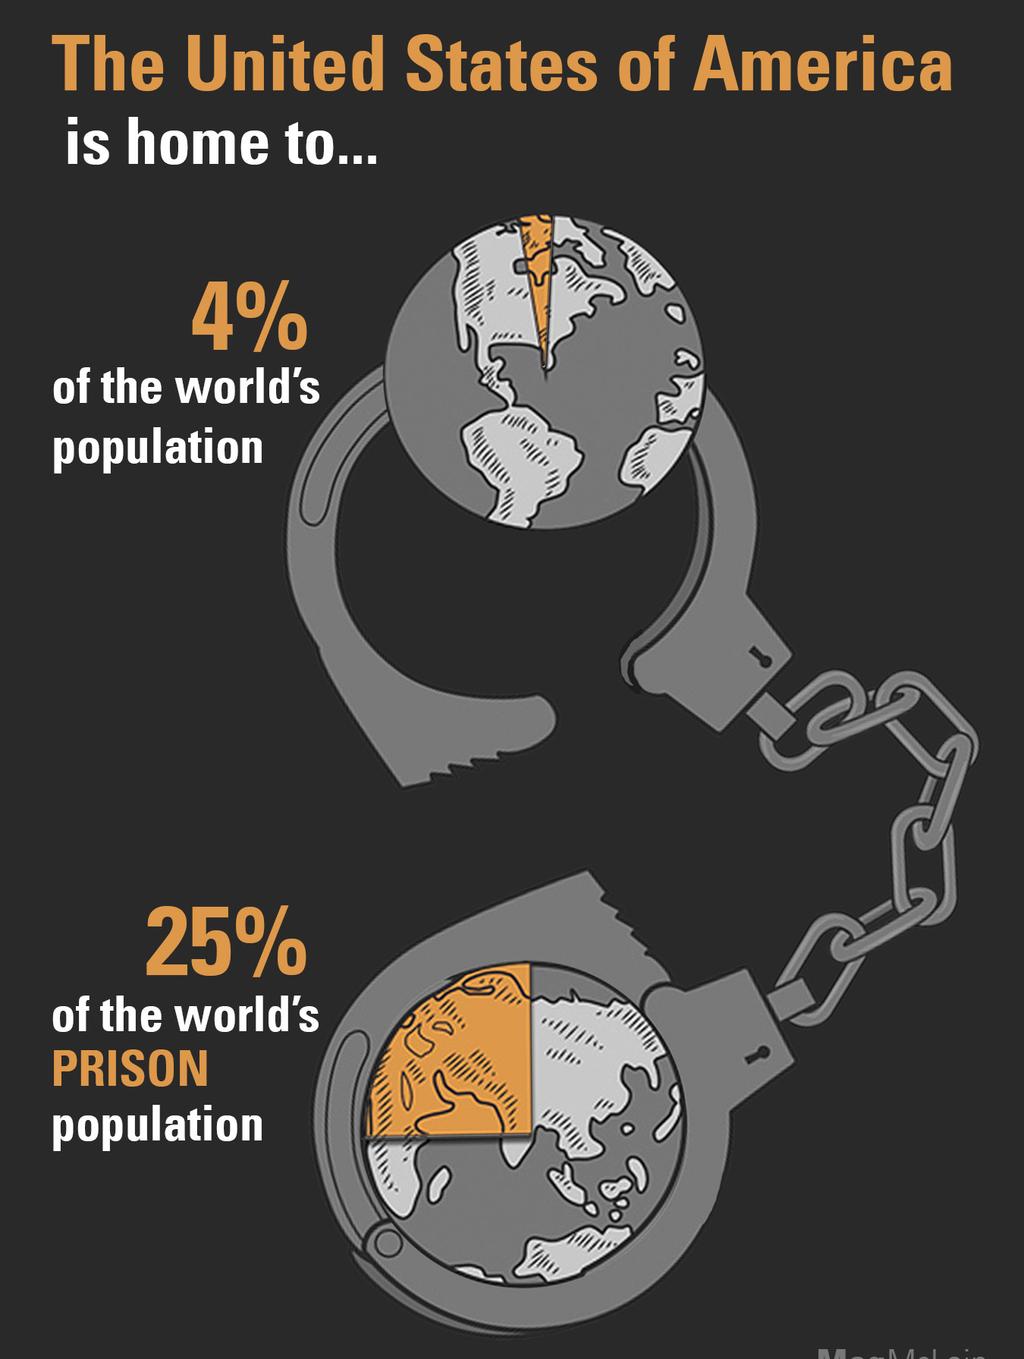 This graphic provides another way to get a global perspective on the U.S. incarceration rate.